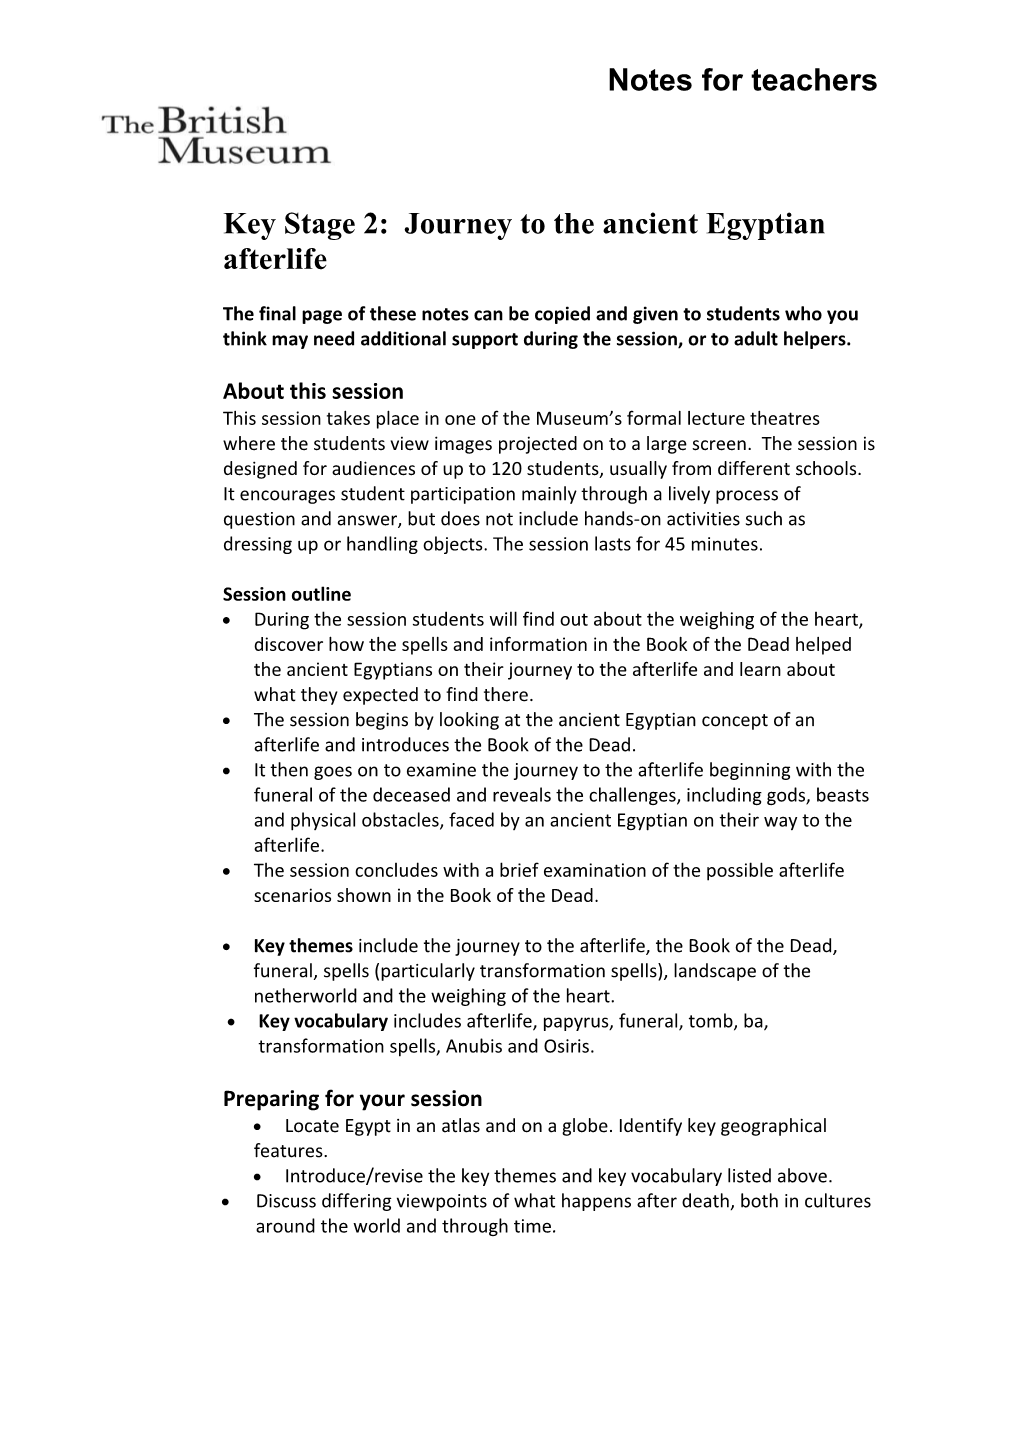 Key Stage 2: Journey to the Ancient Egyptian Afterlife